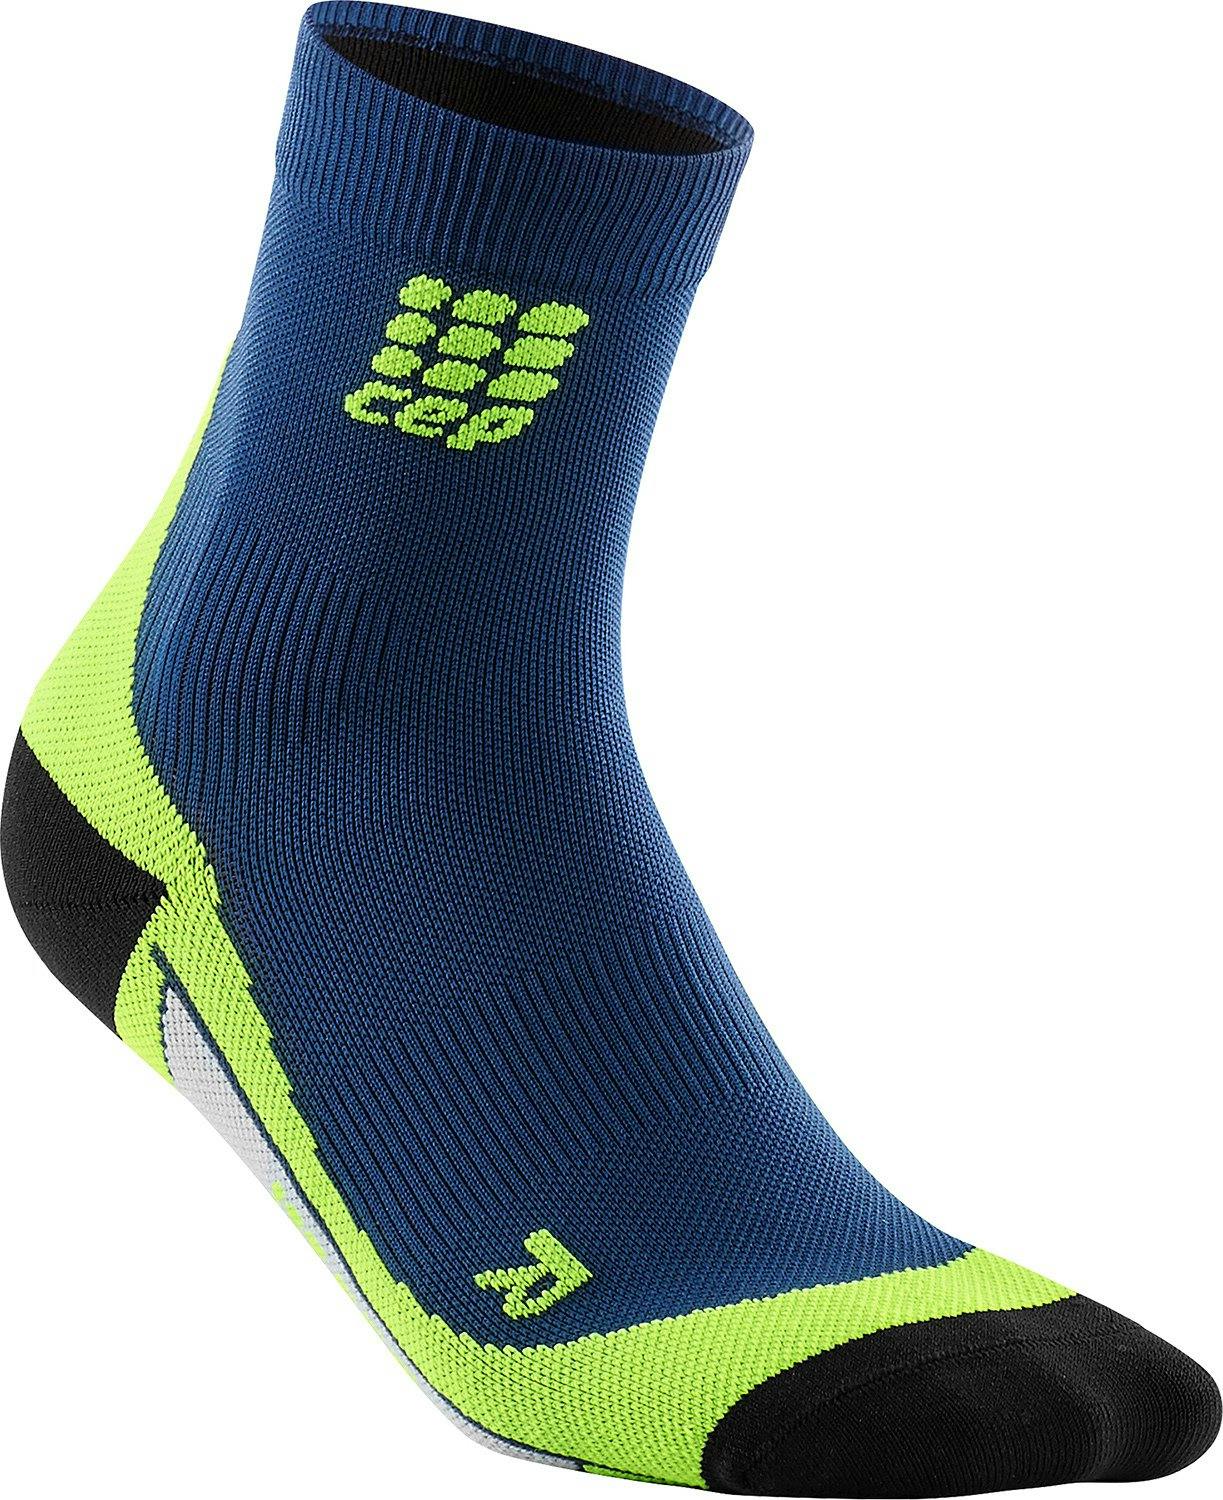 Product image for Dynamic Low-Cut Compression Socks- Women’s